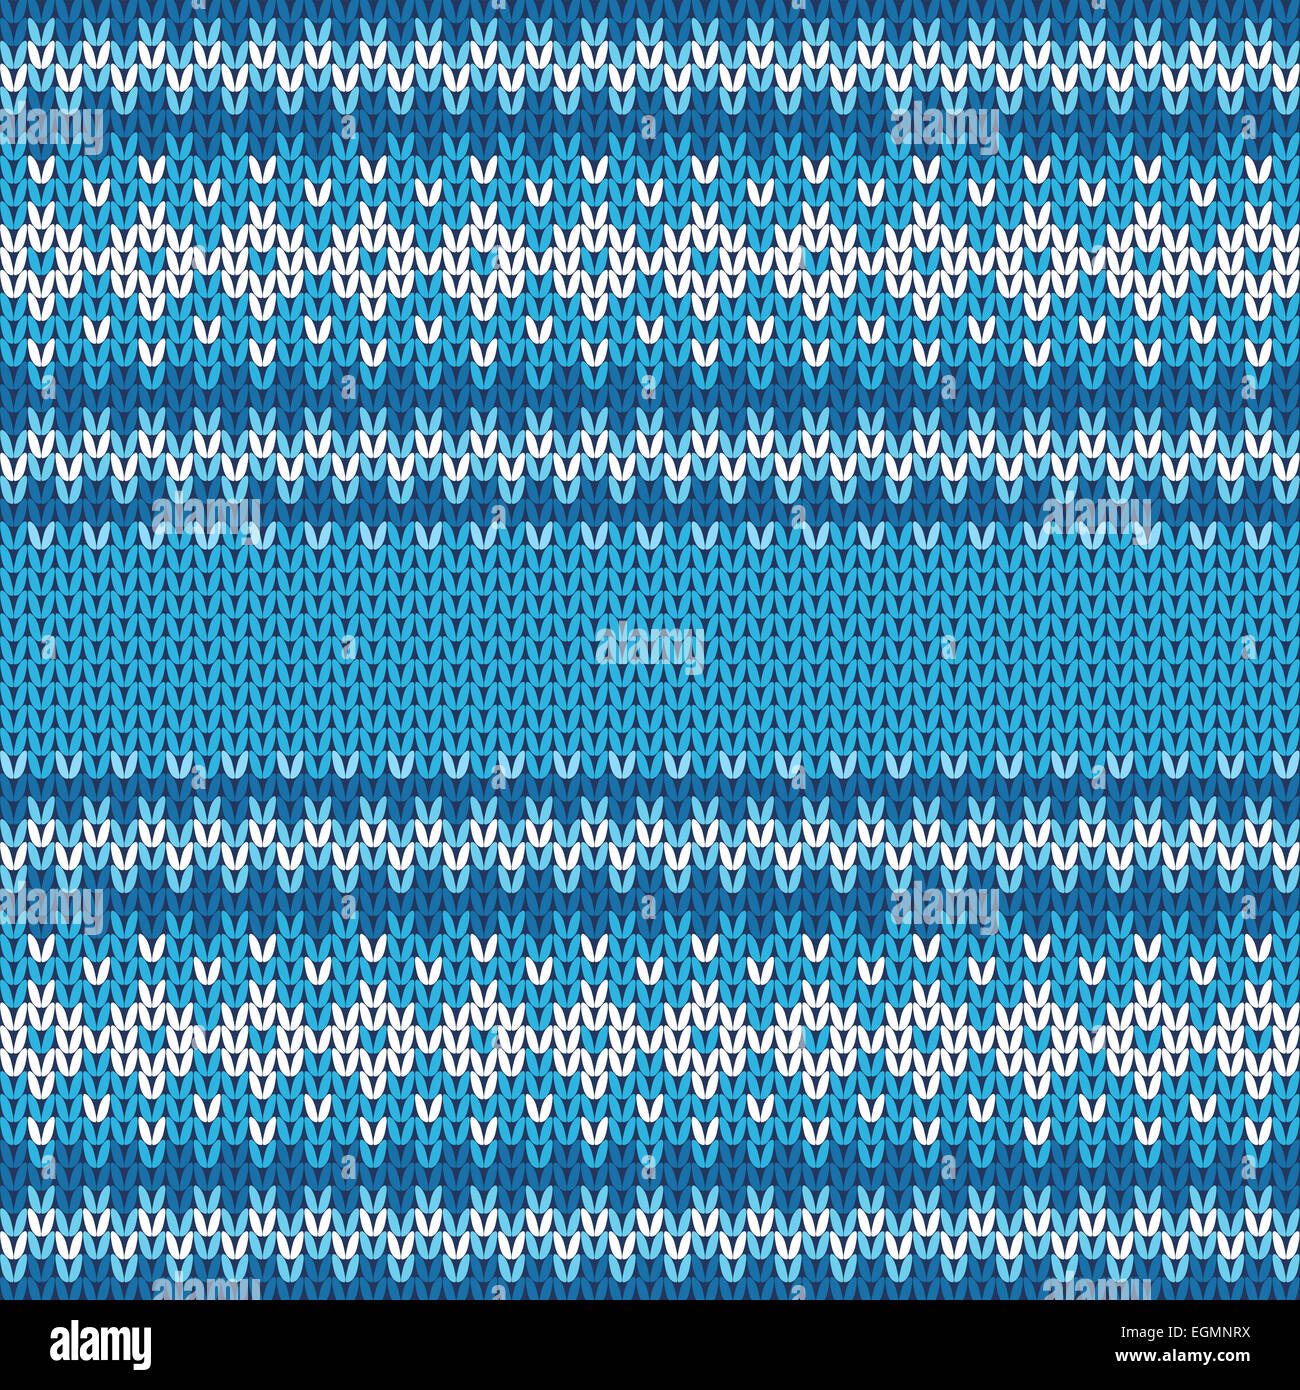 Blue and White Knitted Seamless Pattern from Abstract Geometric Winter Ornament Stock Photo